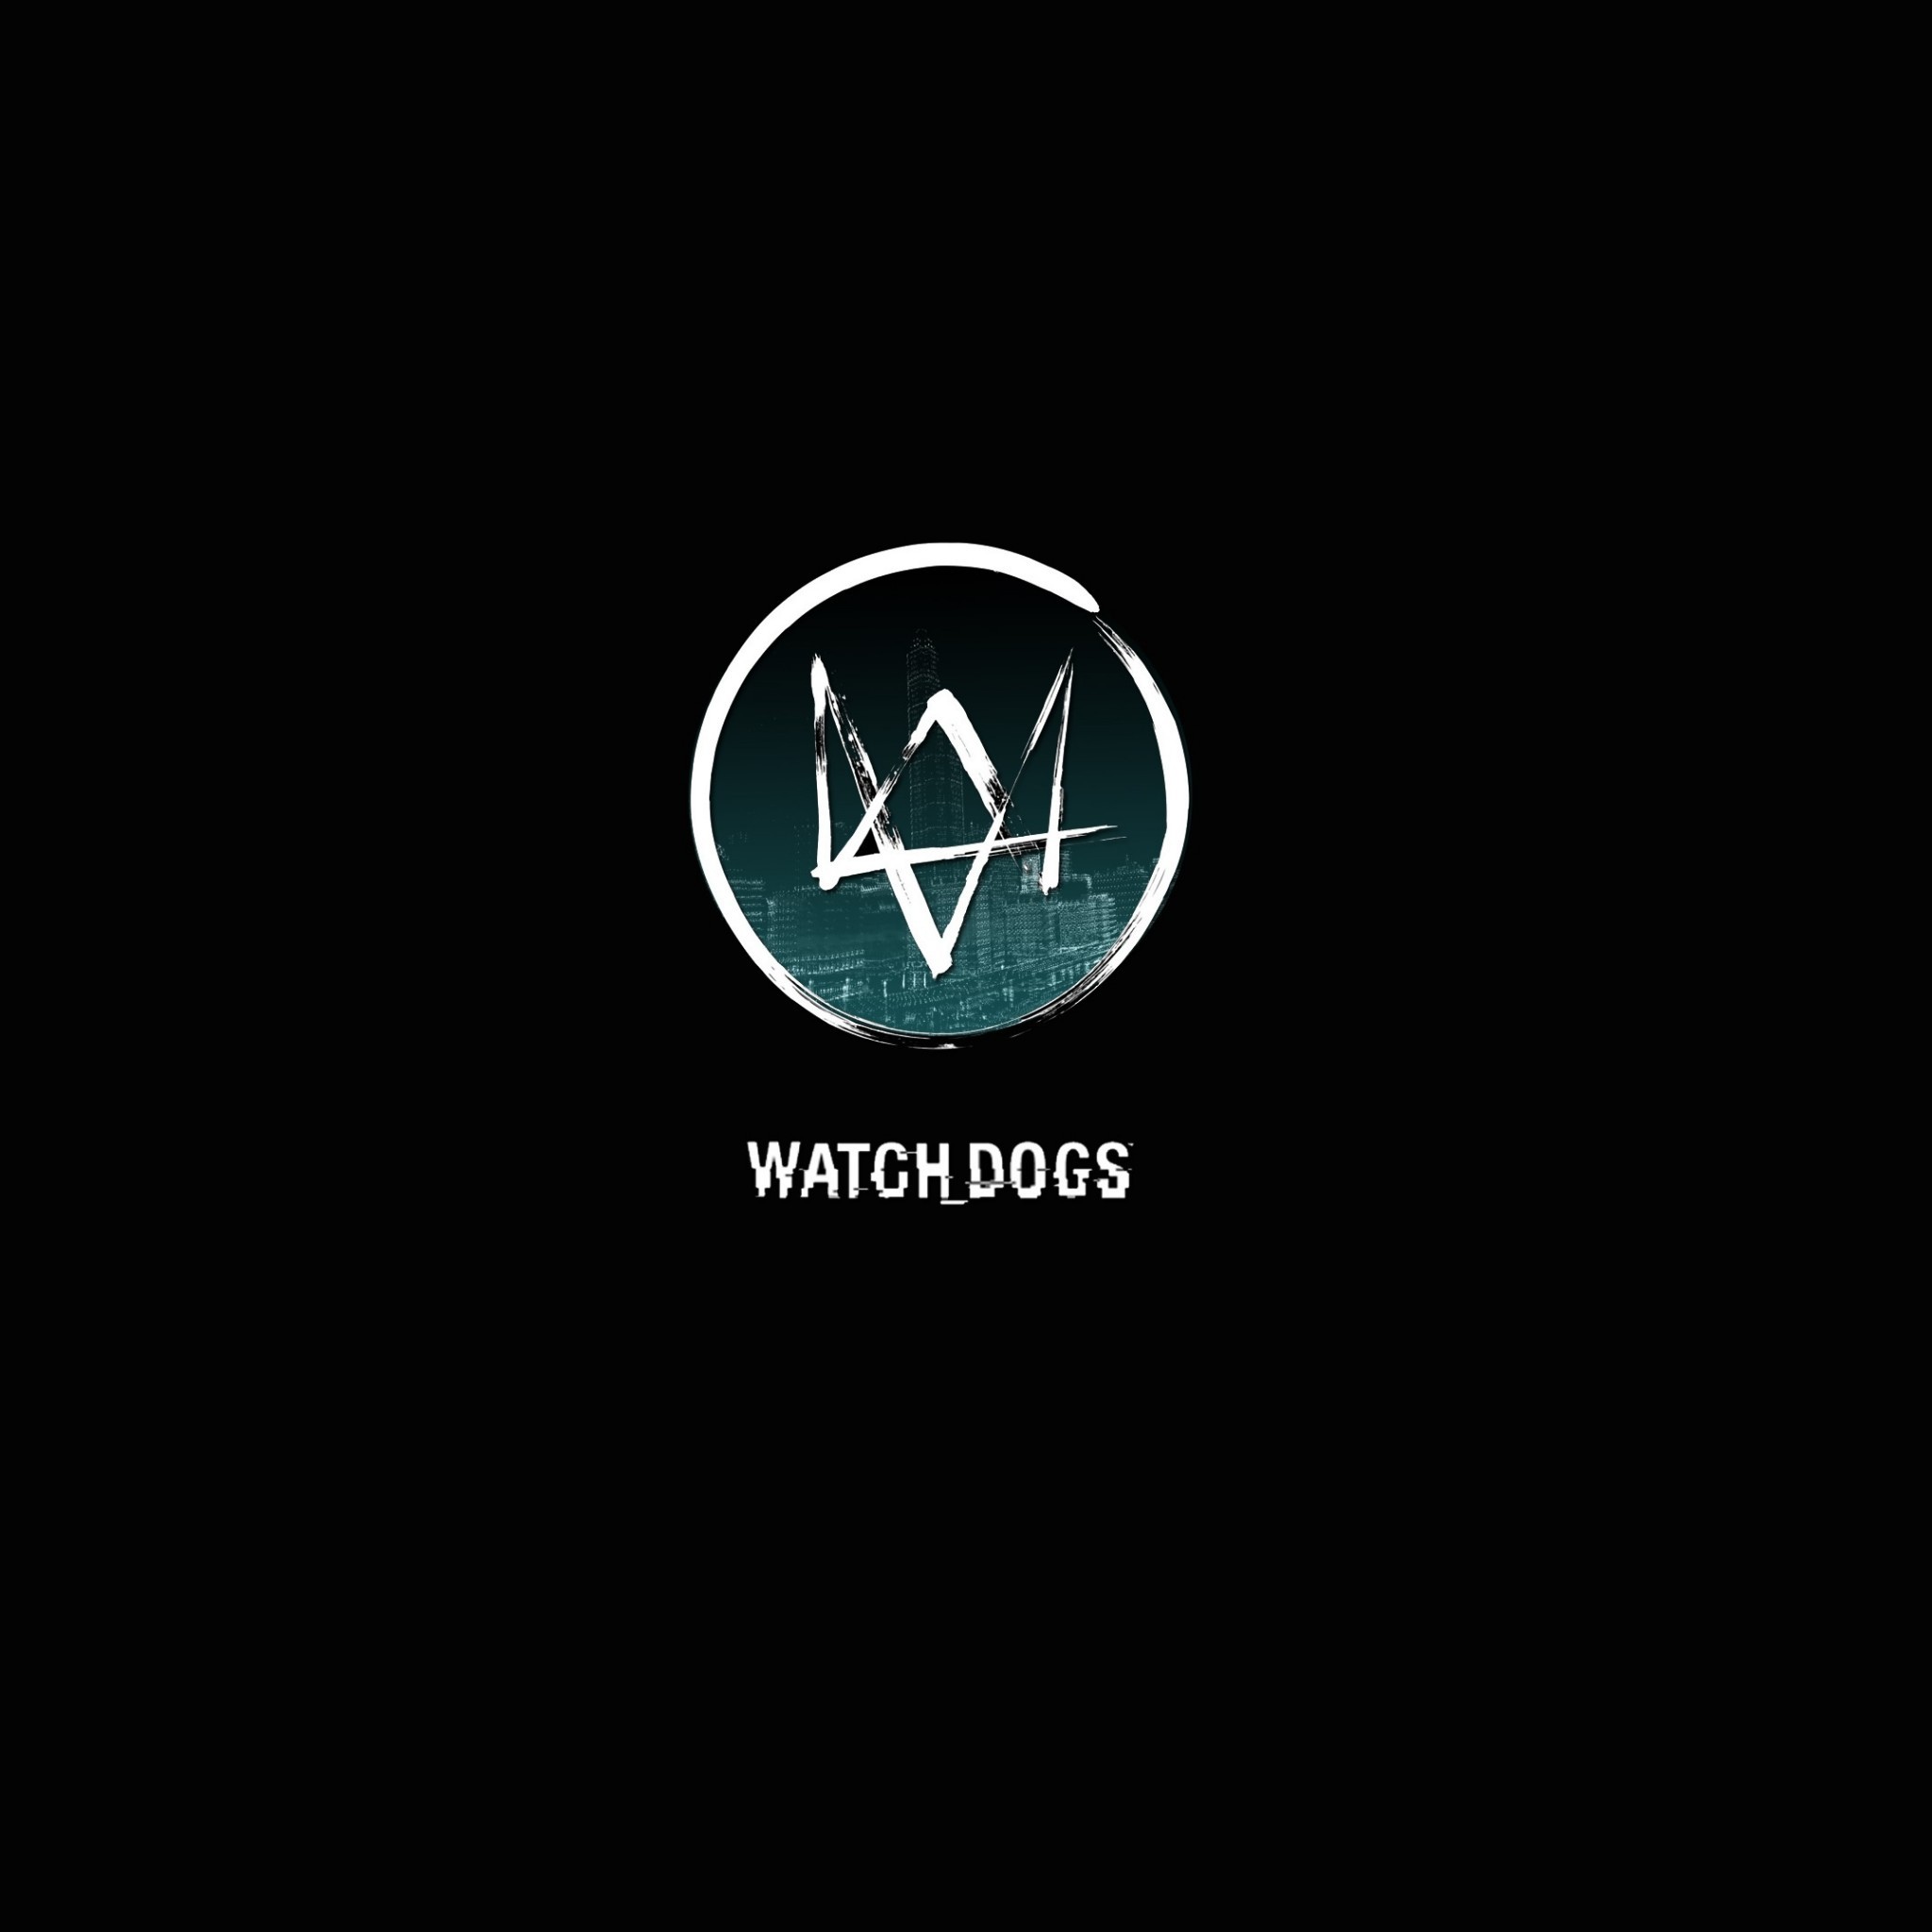 2048x2048 Watch Dogs Logo - Tap to see awesome Watch Dog wallpapers!